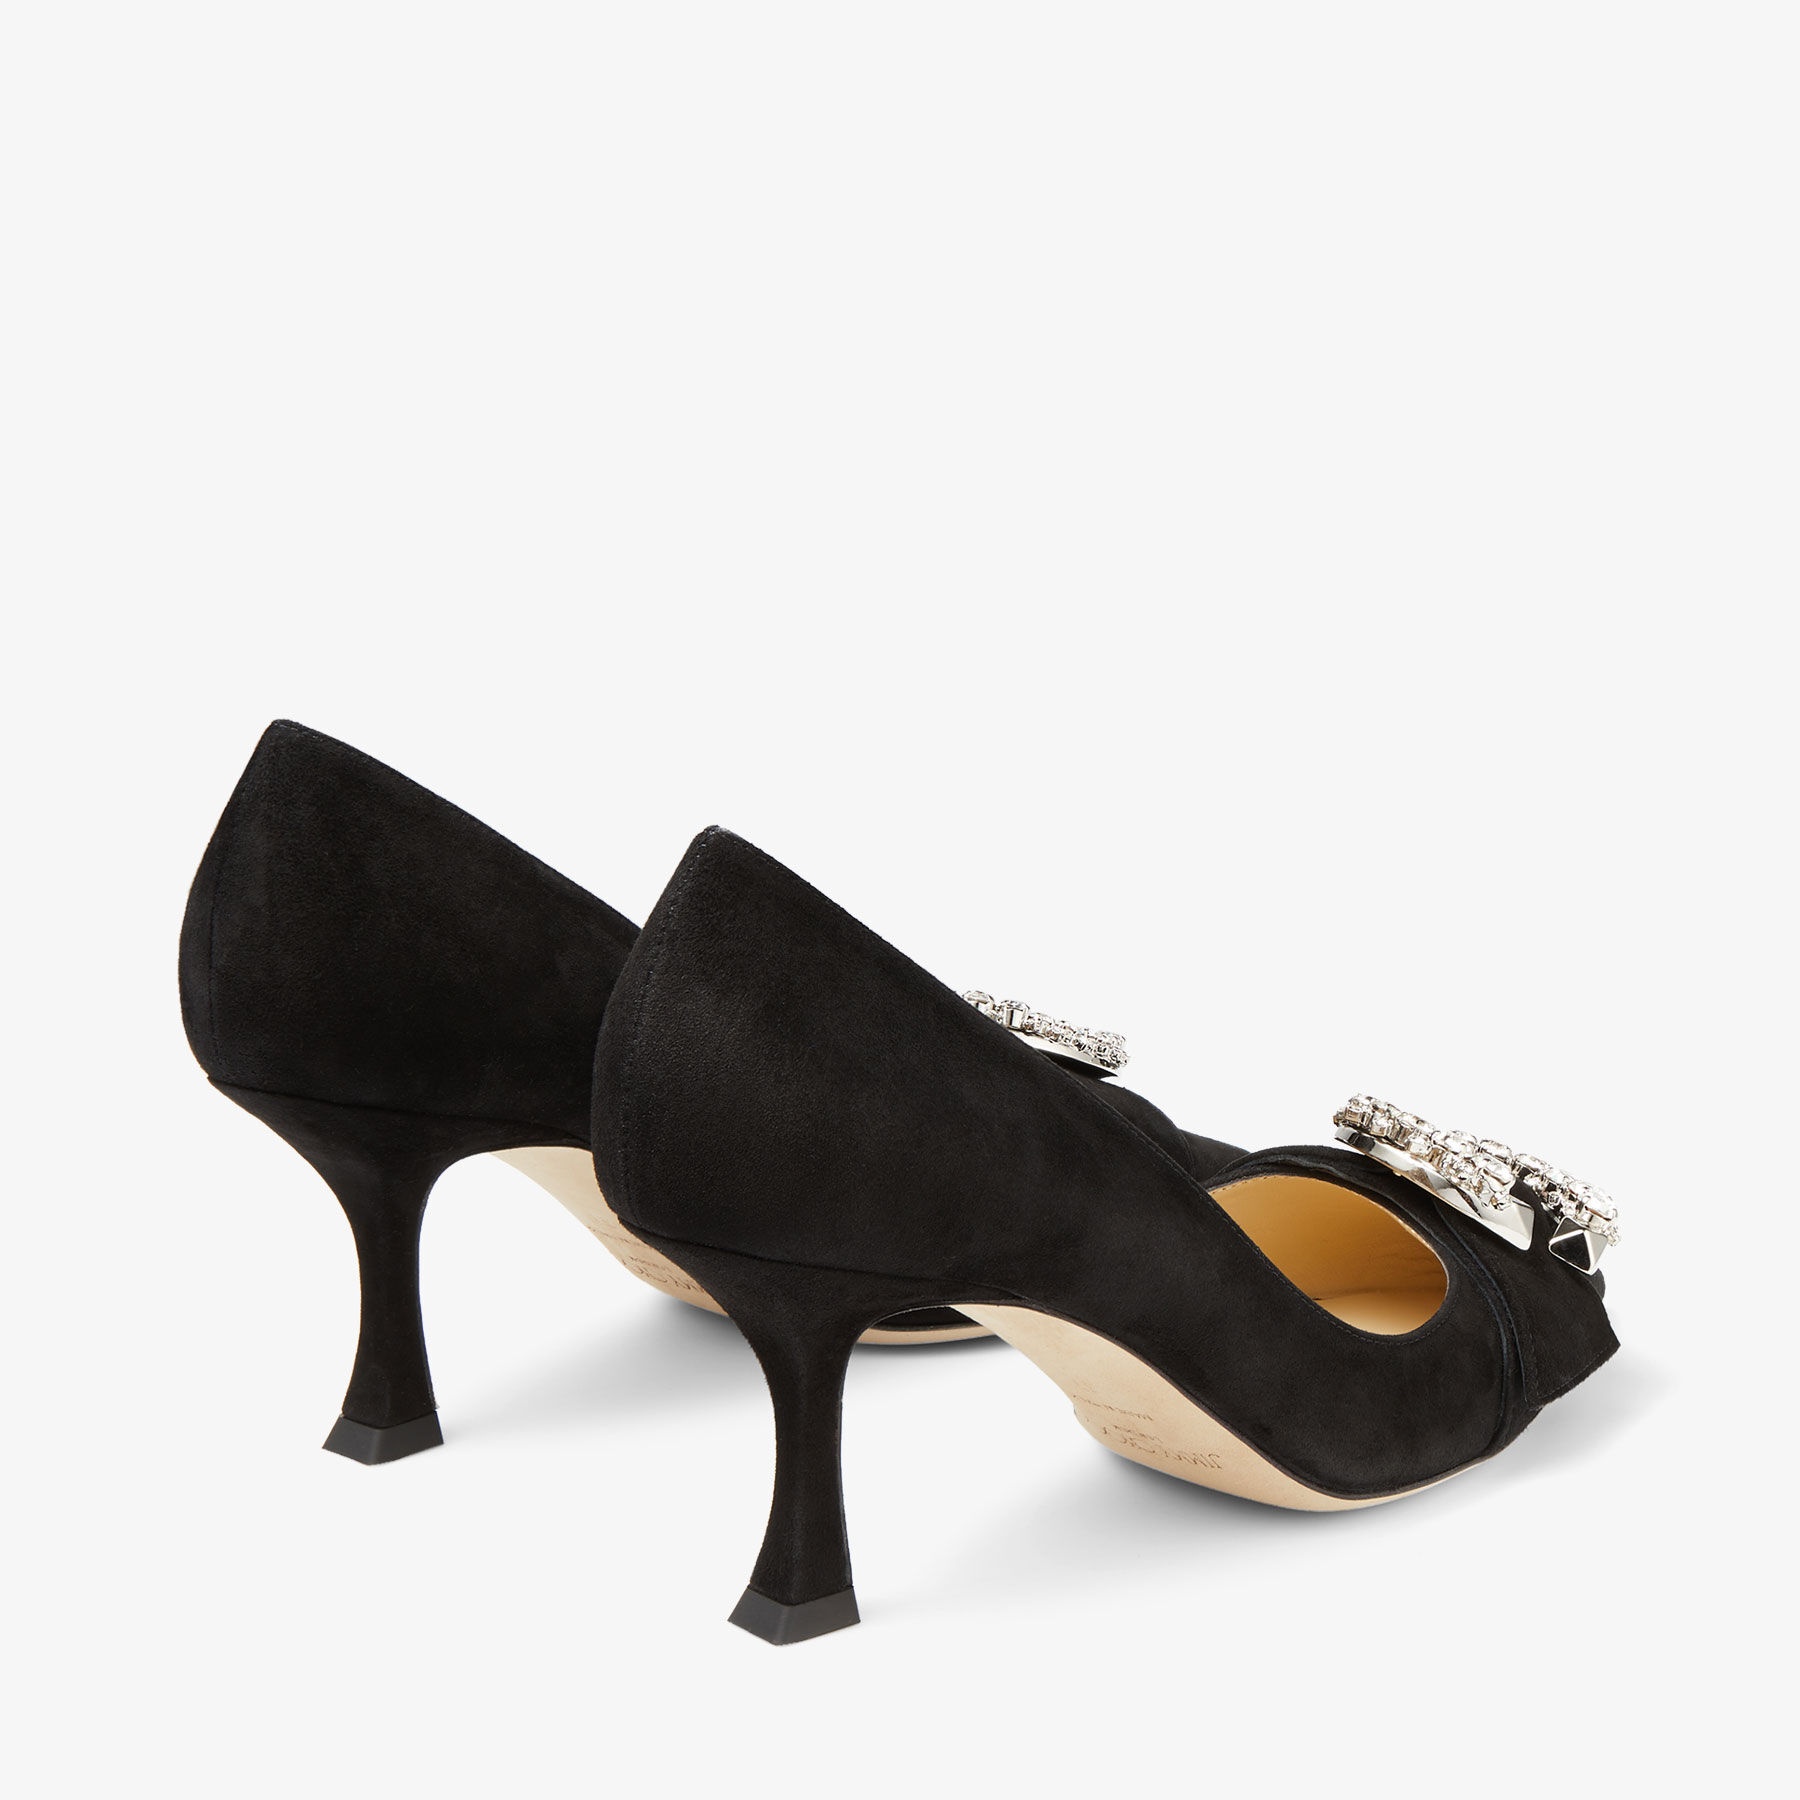 Melva 70
Black Suede Pointed-Toe Pumps with Crystal Buckle - 6